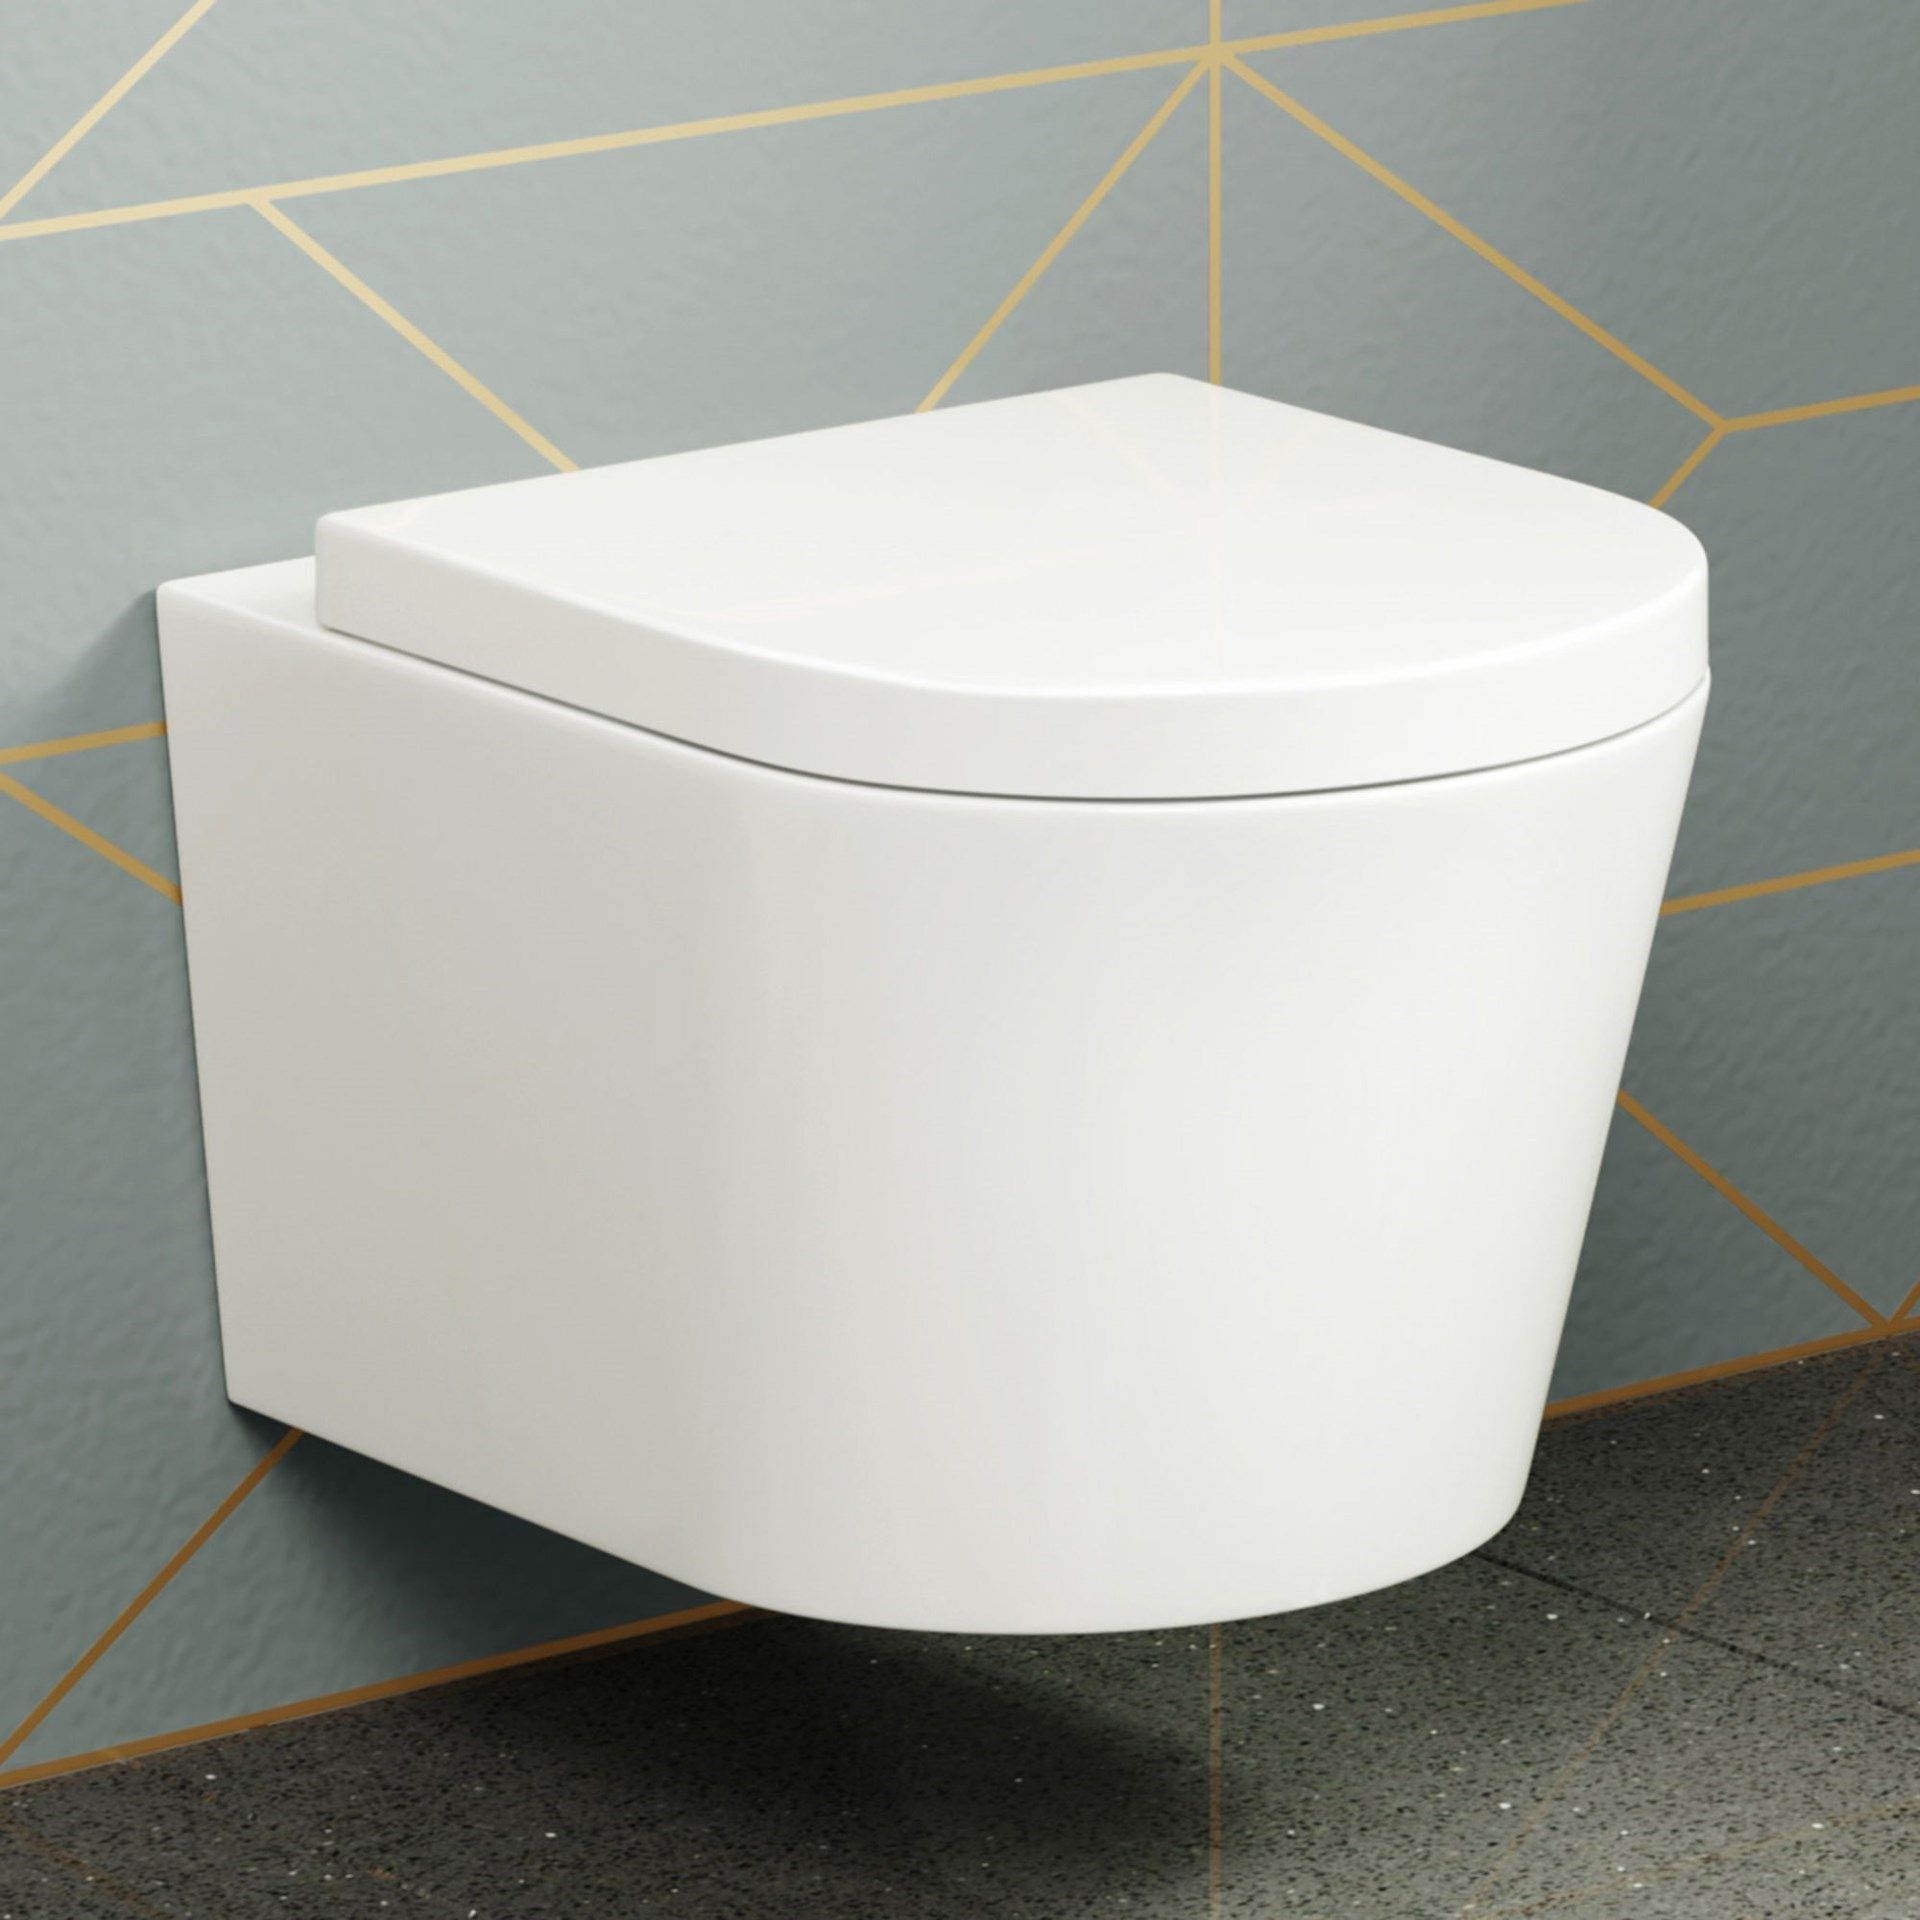 NEW & BOXED Lyon II Wall Hung Toilet inc Luxury Soft Close Seat.RRP £349.99 each. We love thi...